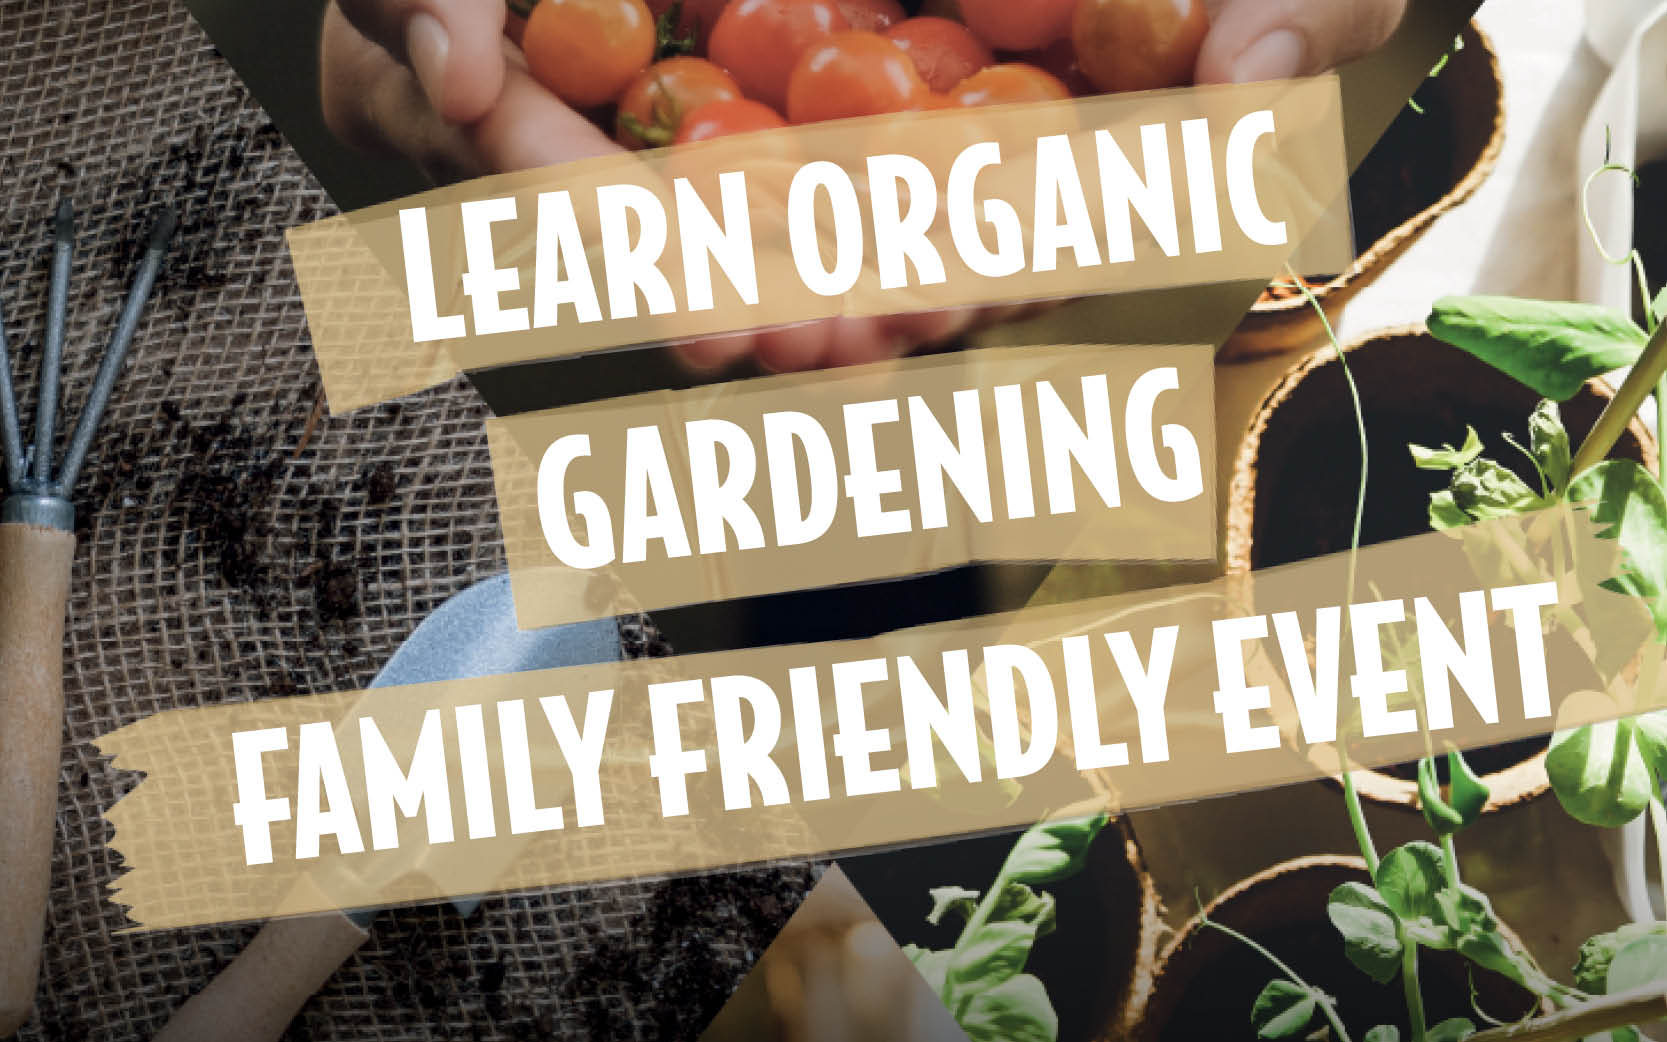 Learn Organic Gardening Family Friendly Event